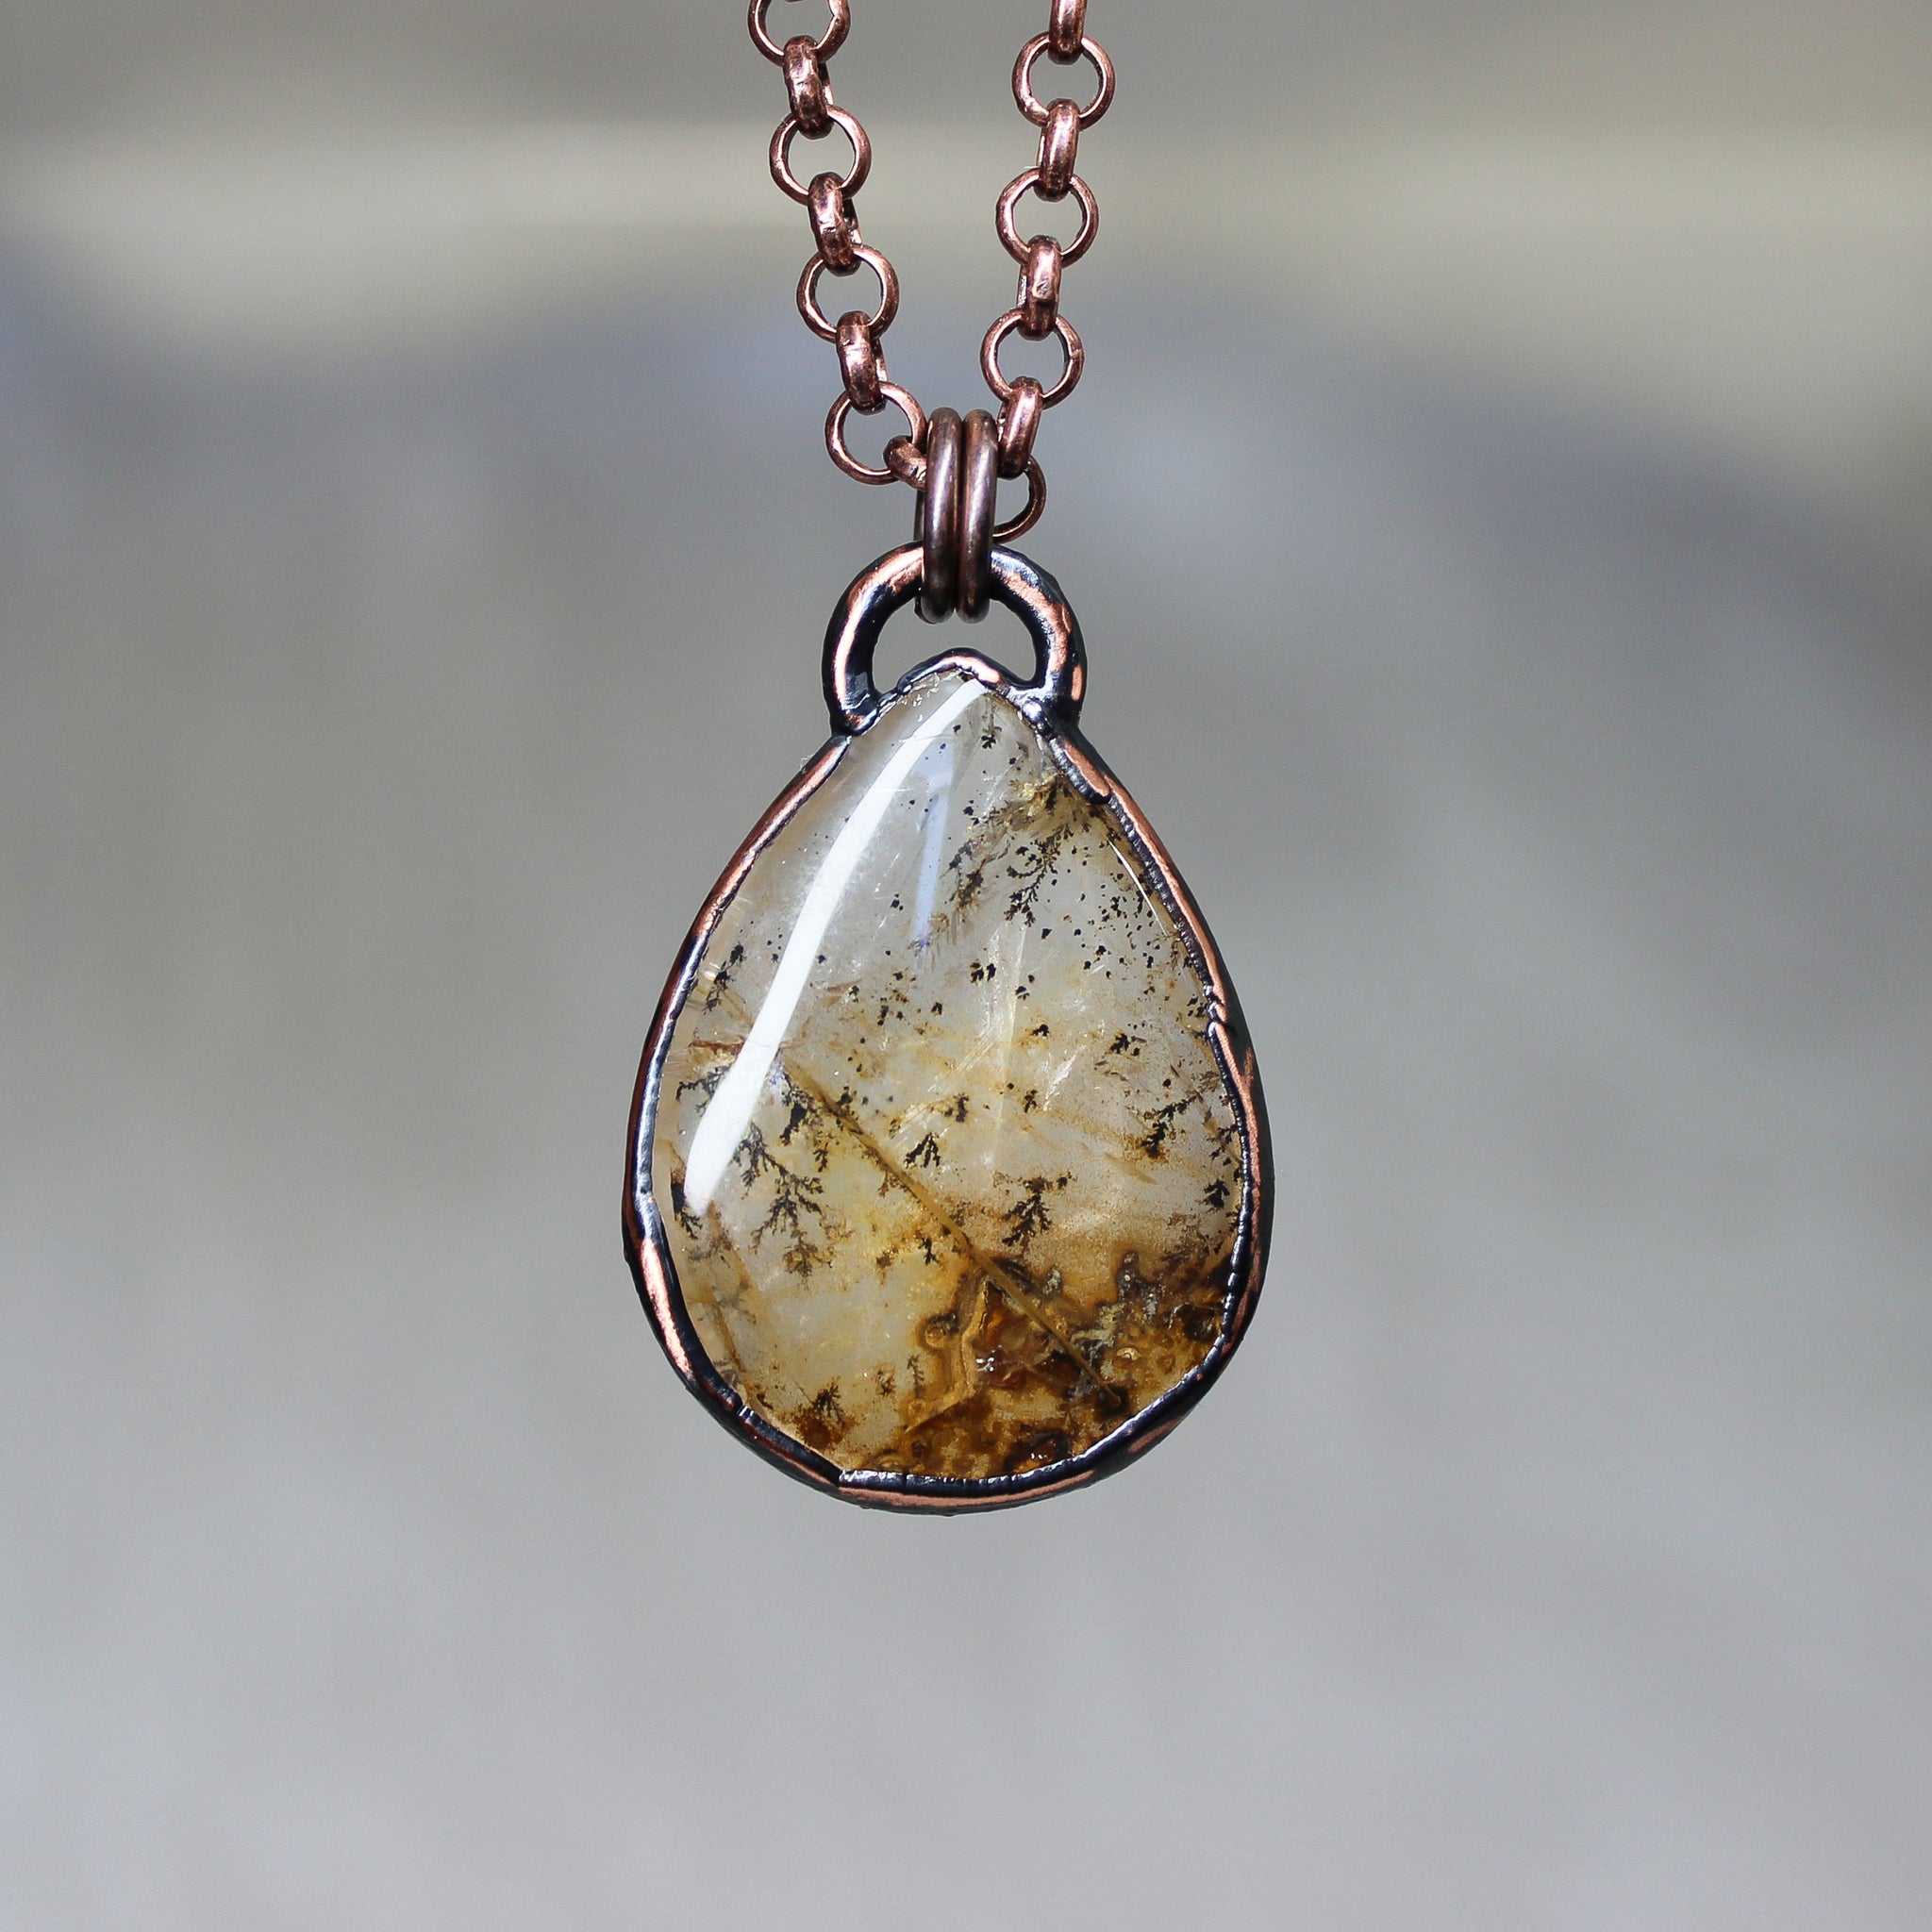 Dendritic Agate Necklace - a